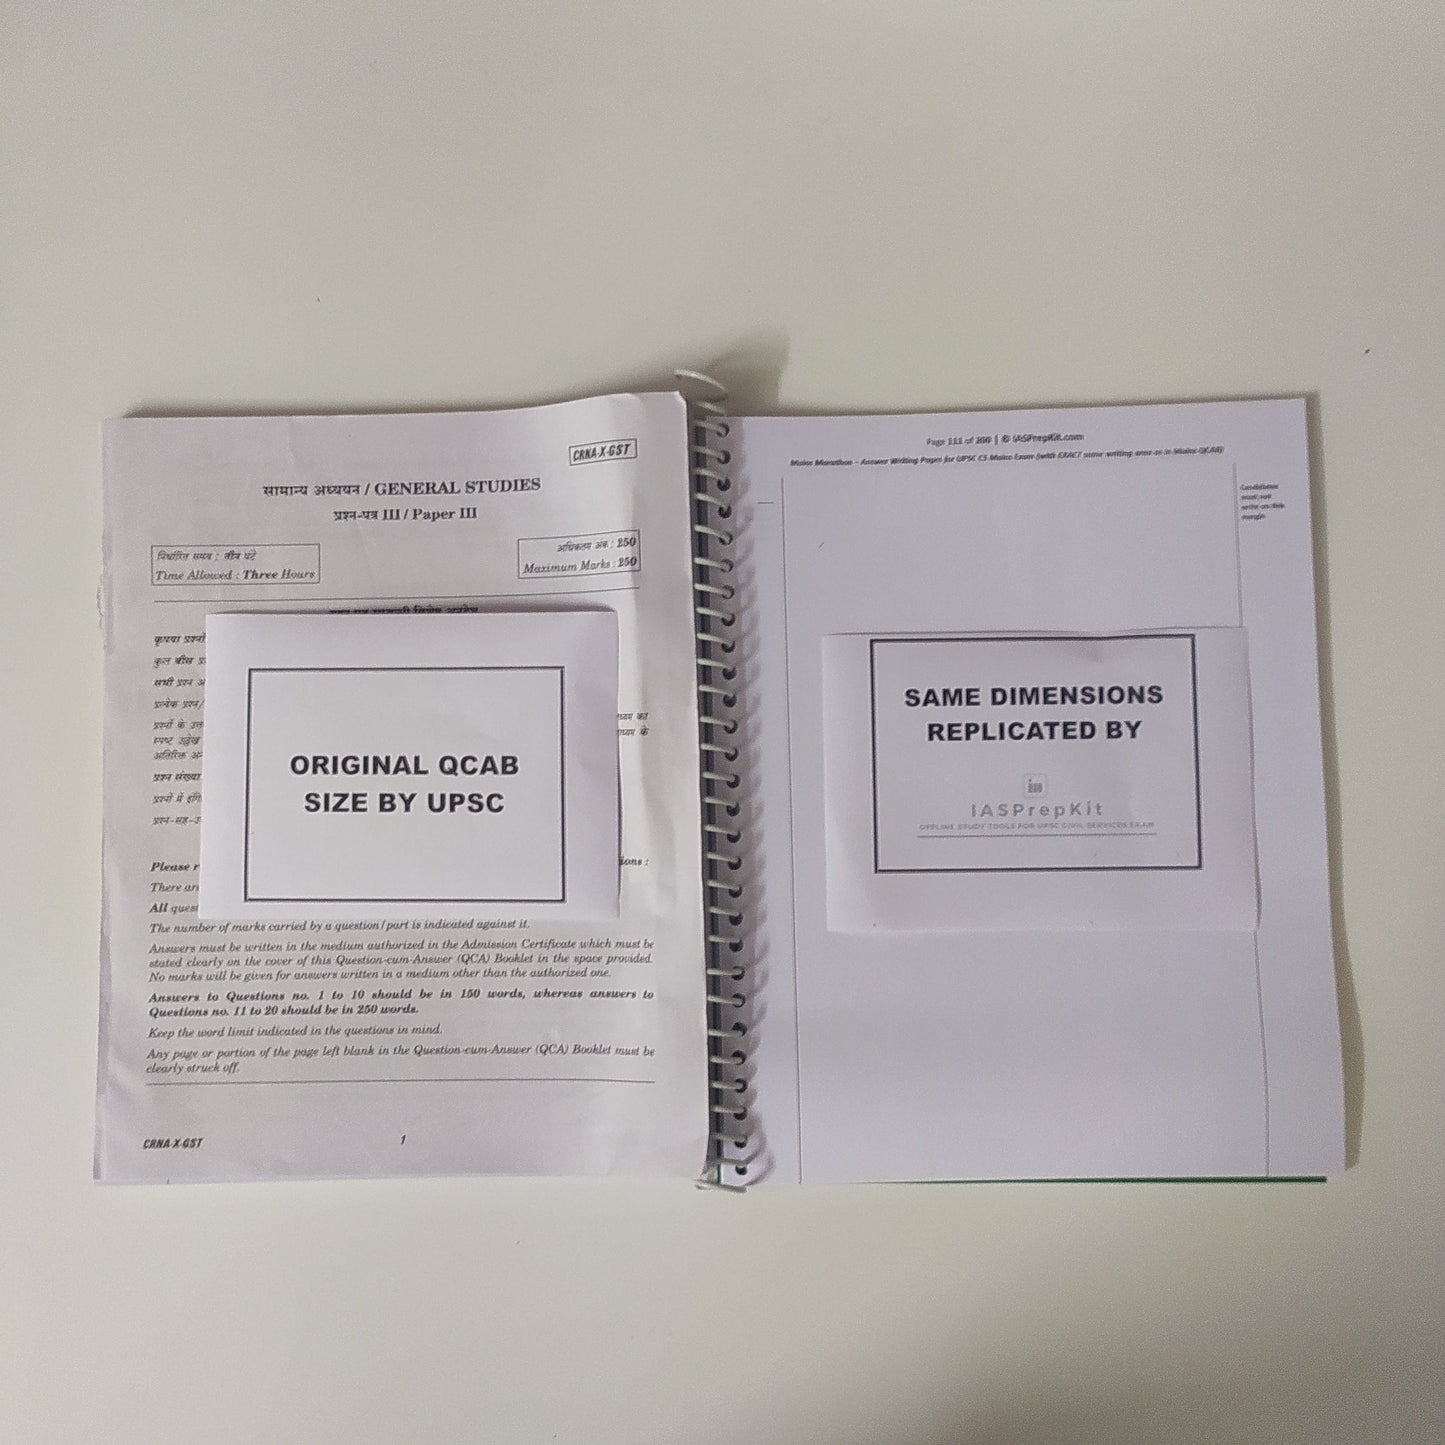 10 Booklets - Mains Marathon - Answer Writing Booklets for UPSC CS Mains Exam with exact same dimensions as in UPSC QCAB (200 pages in each booklet)